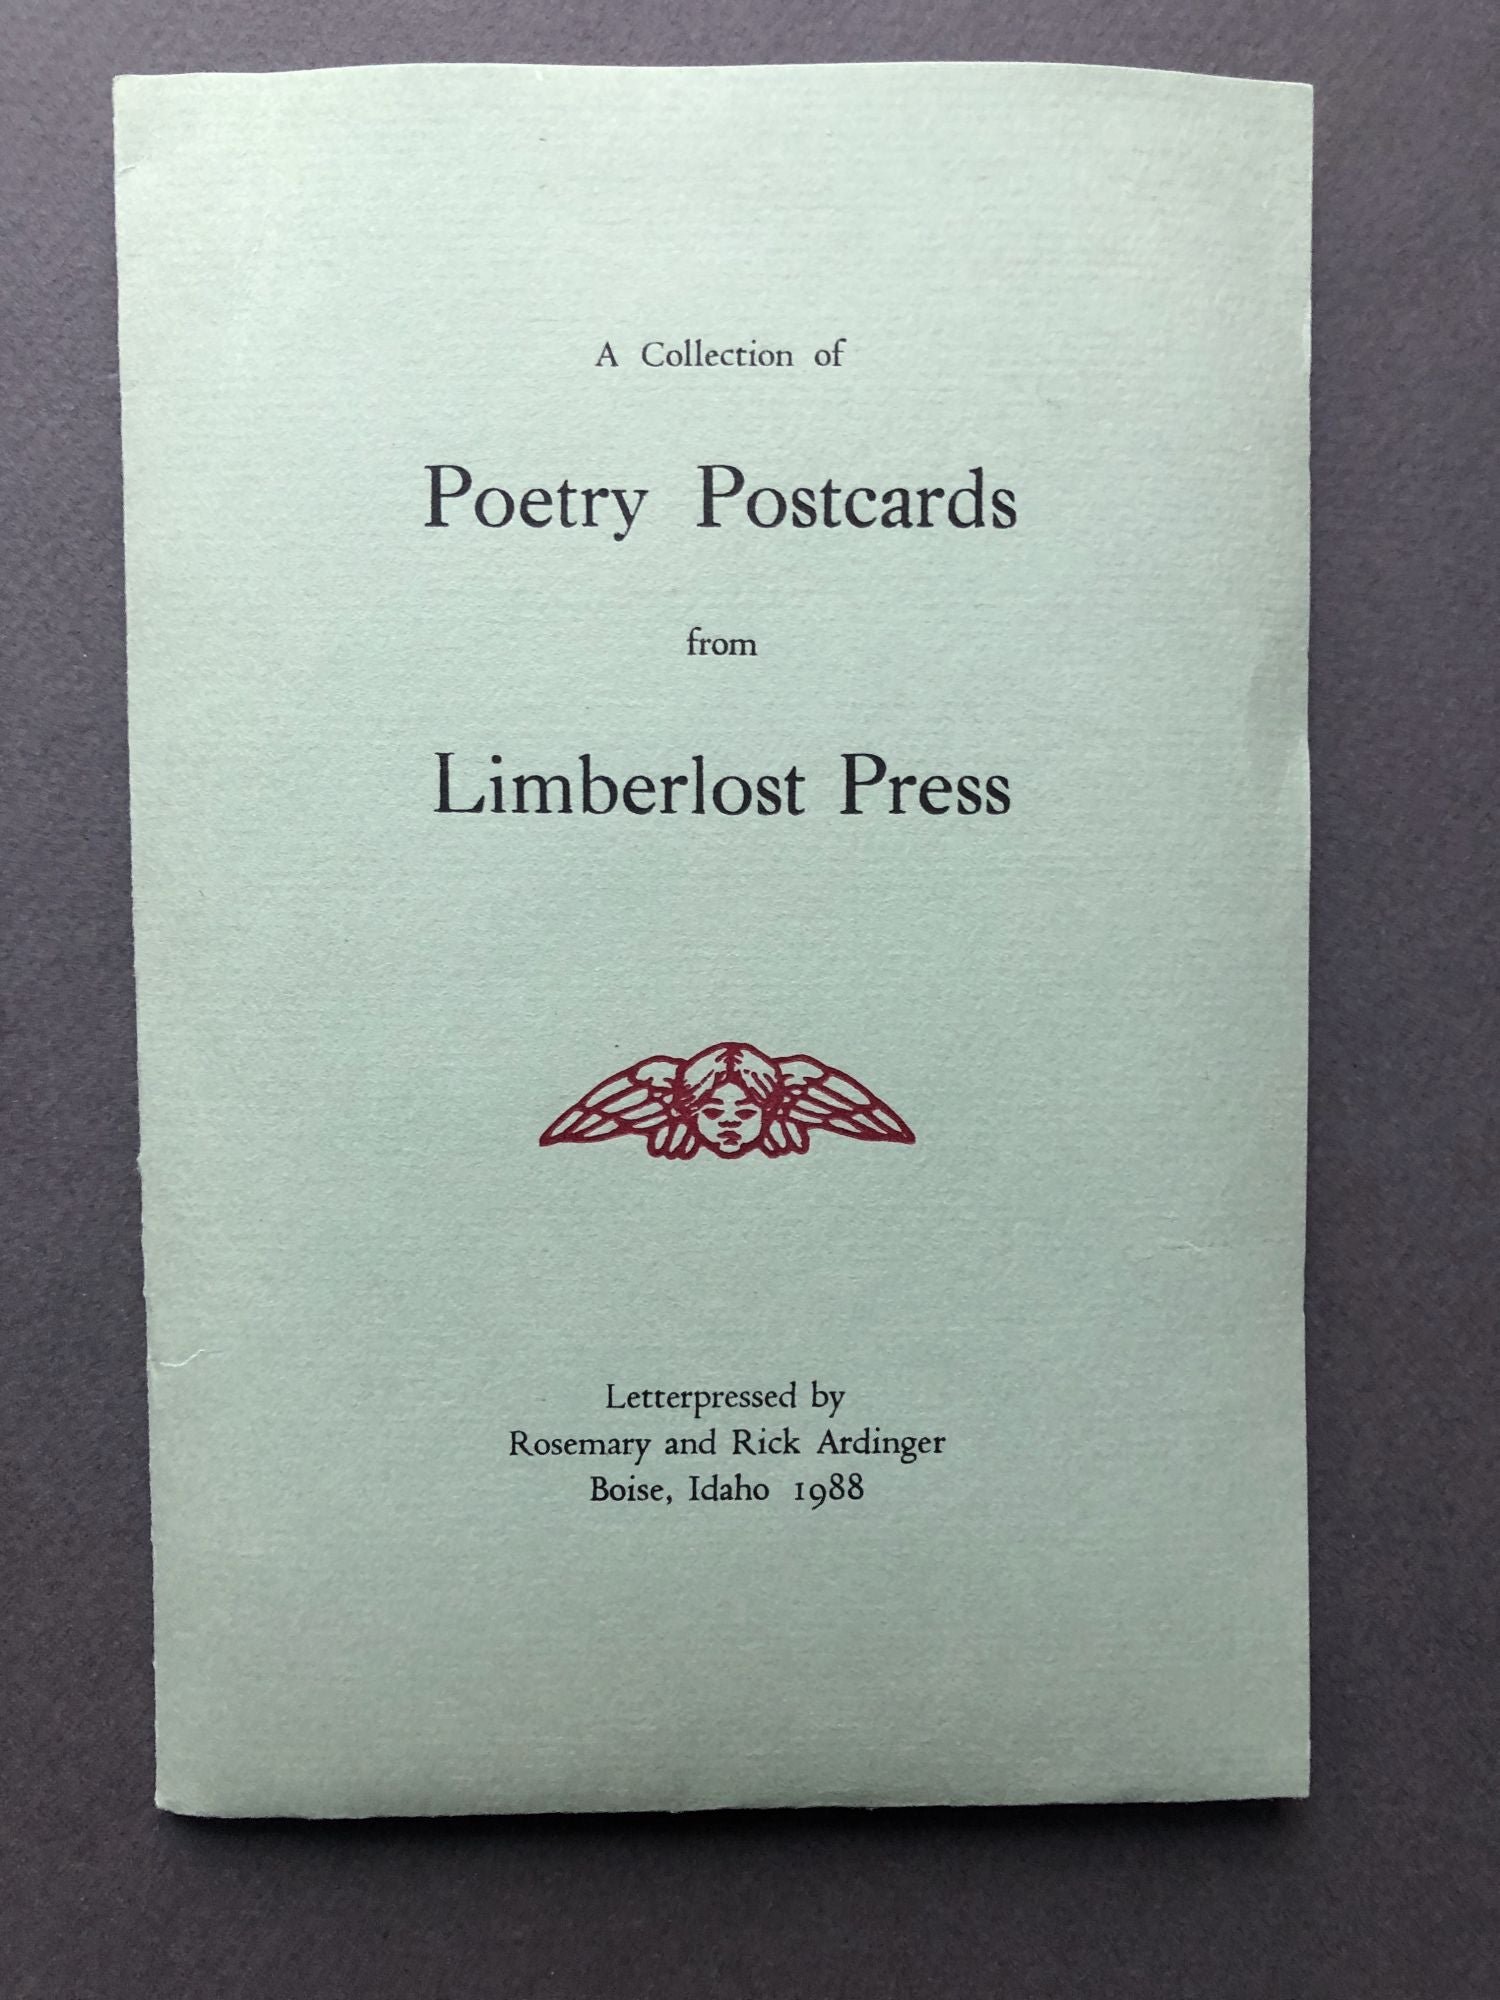 A Collection Of Poetry Postcards From The Limberlost Press Charles Bukowski Allen Ginsberg